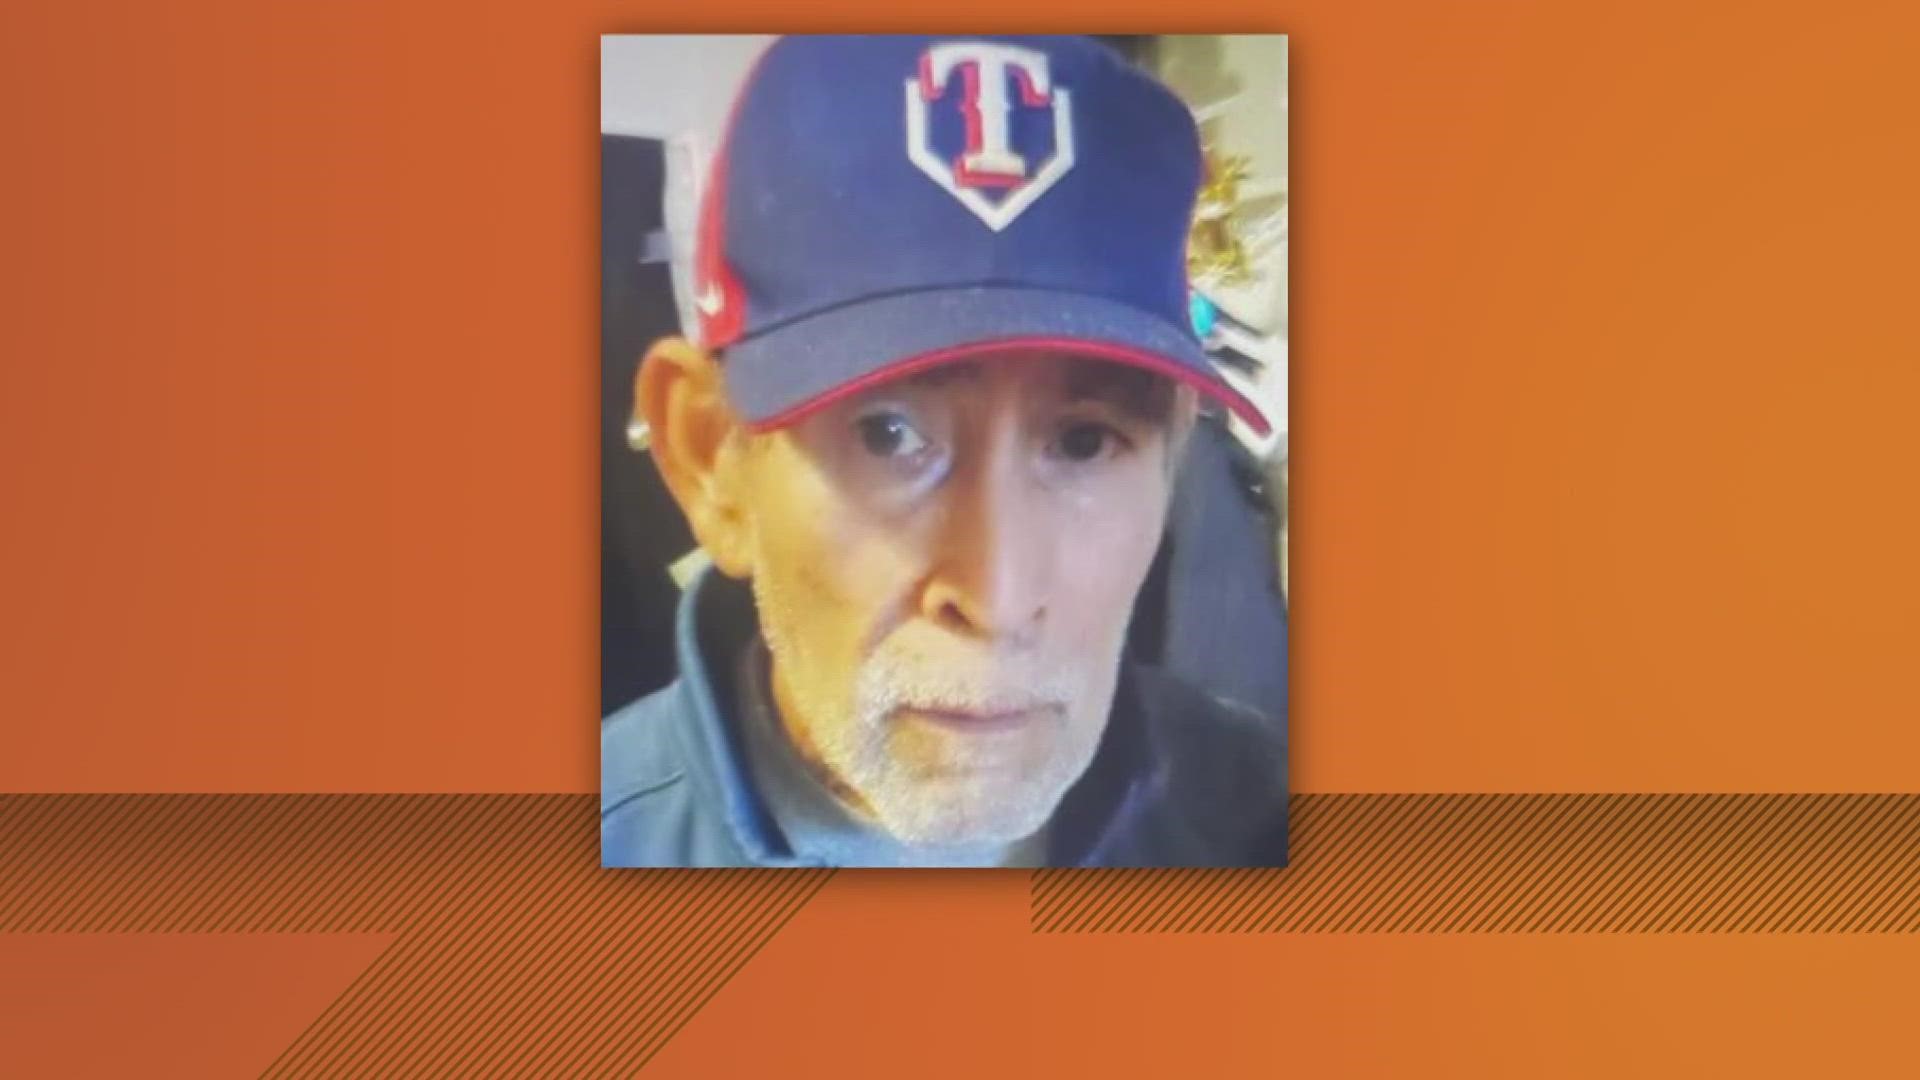 Police say the man, Miguel Martinez, was last seen on Oak Grove Court North. Anyone with info should call 817-392-4222 and reference case No. 23-0016354.